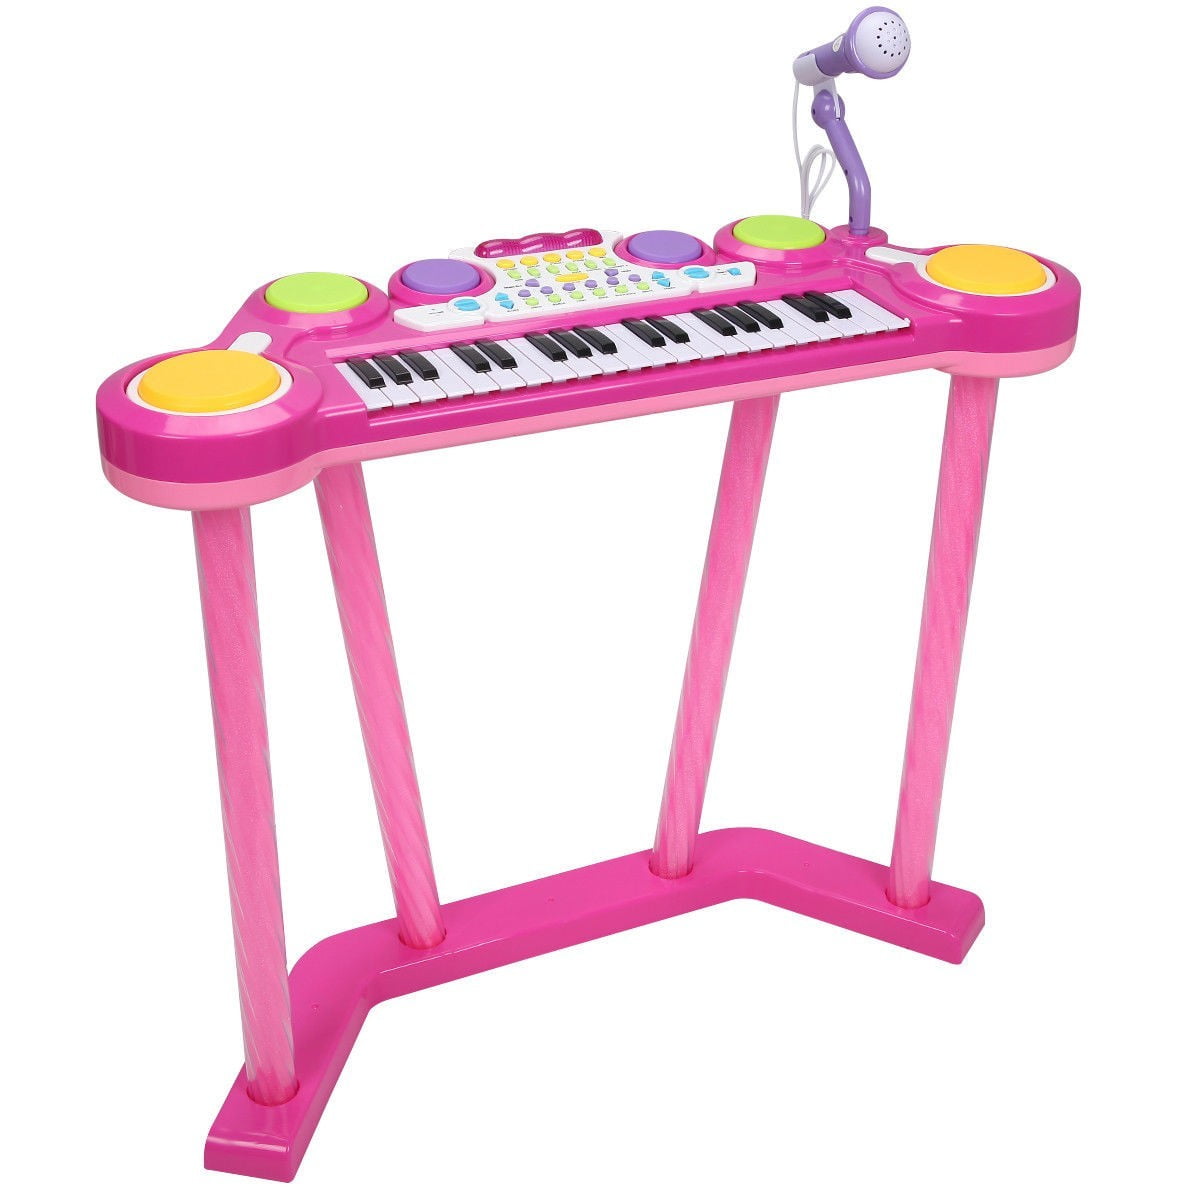 Kid Electronic Keyboard Piano Toy Music Instruments with Microphone 37 Keys Pink